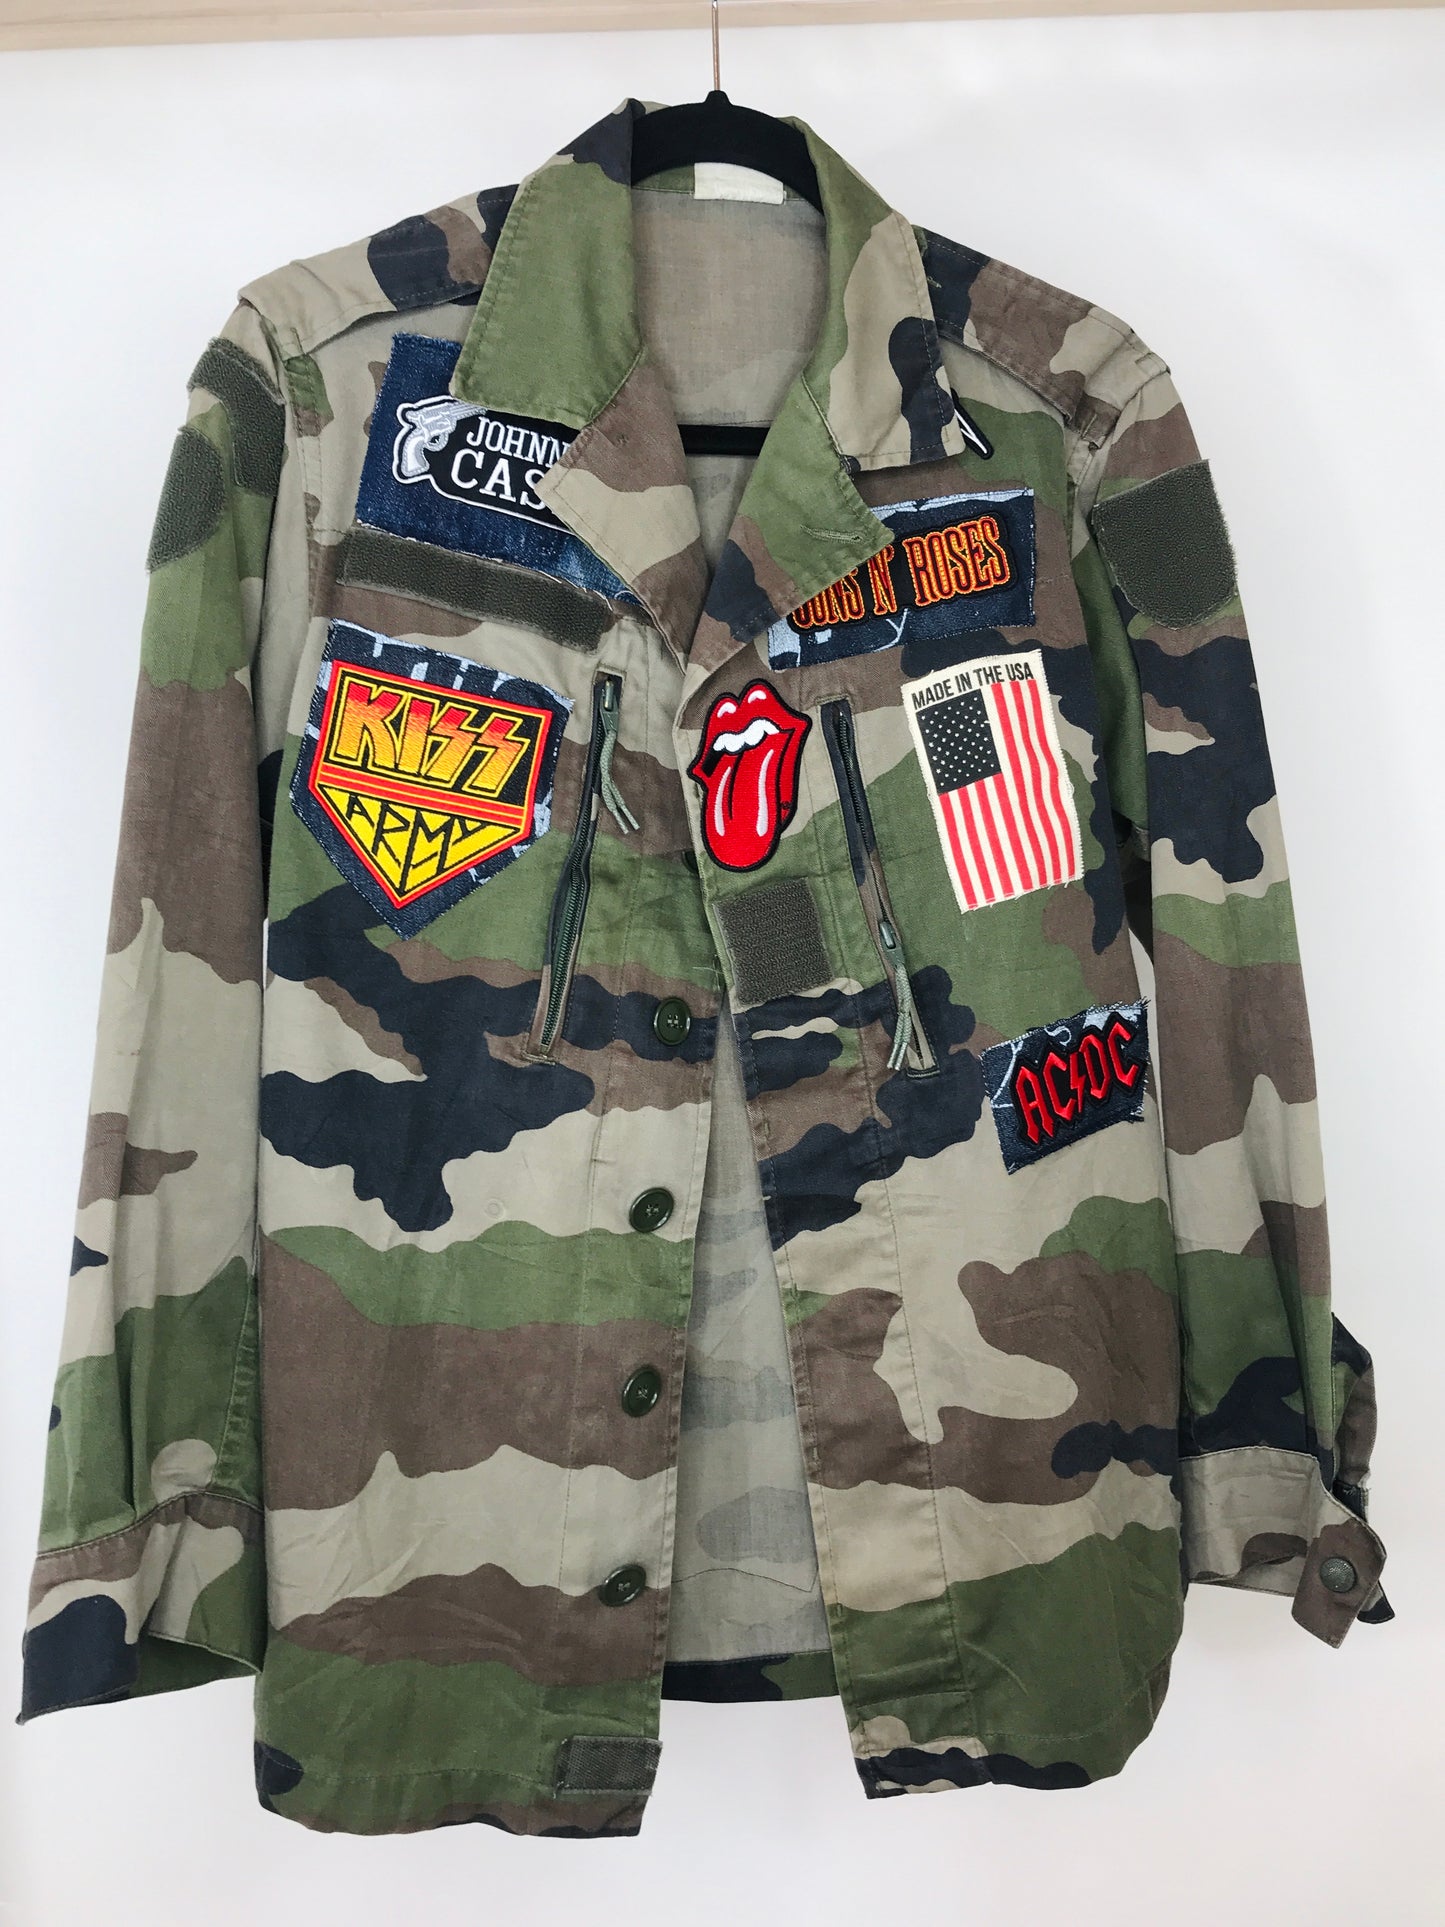 JT Vintage Collection - Bandlove Army Jackets